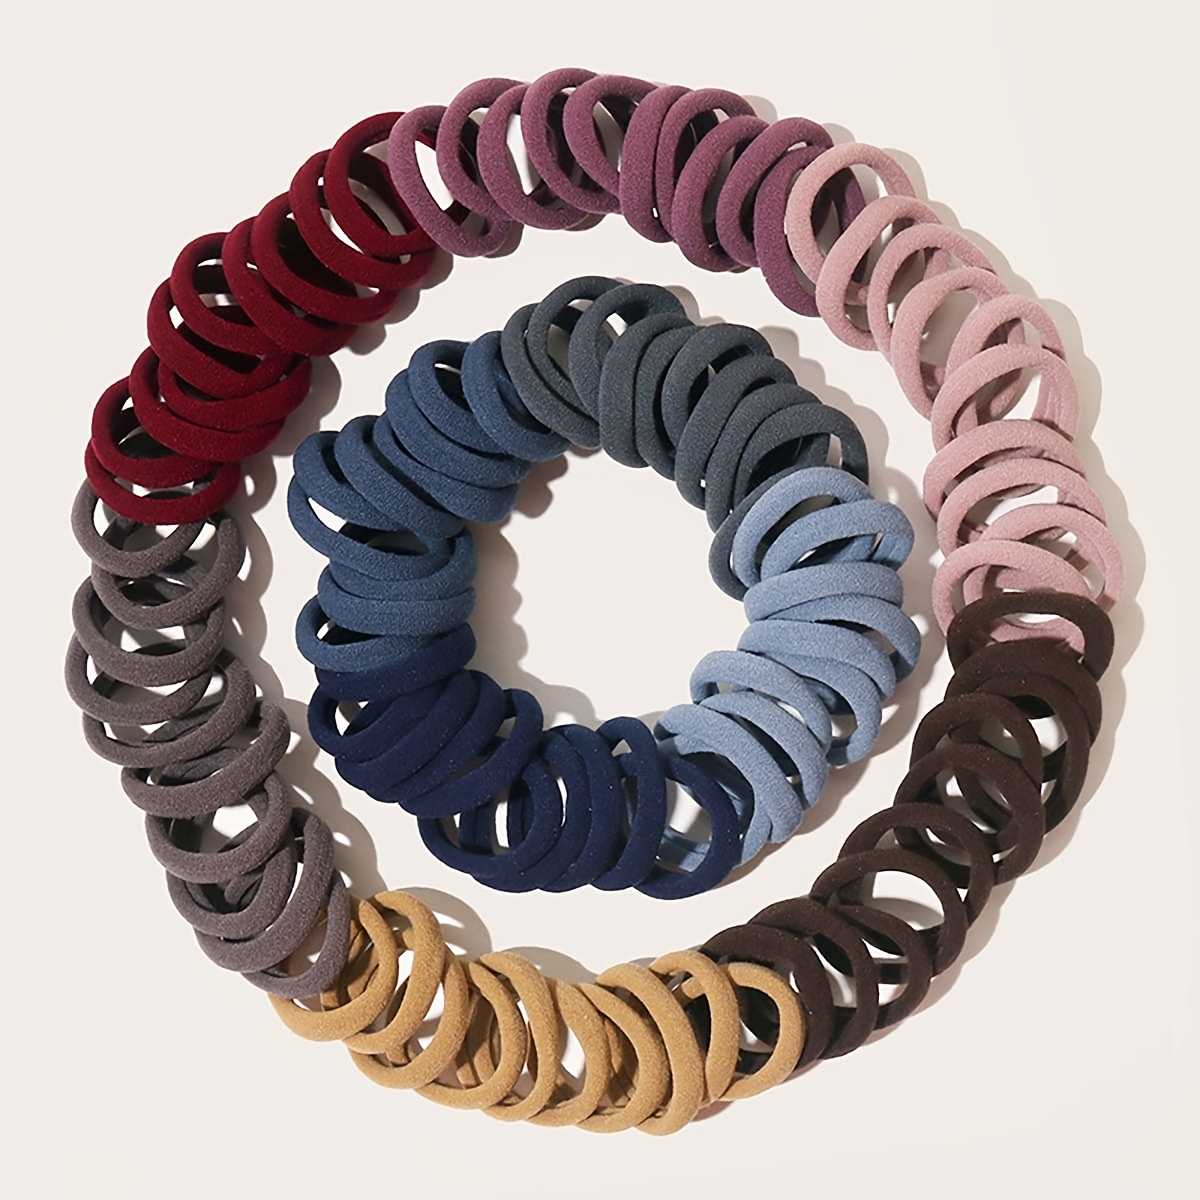 100pcs Ponytail Holders for Thick Thin Hair | Free Shipping | Our Store